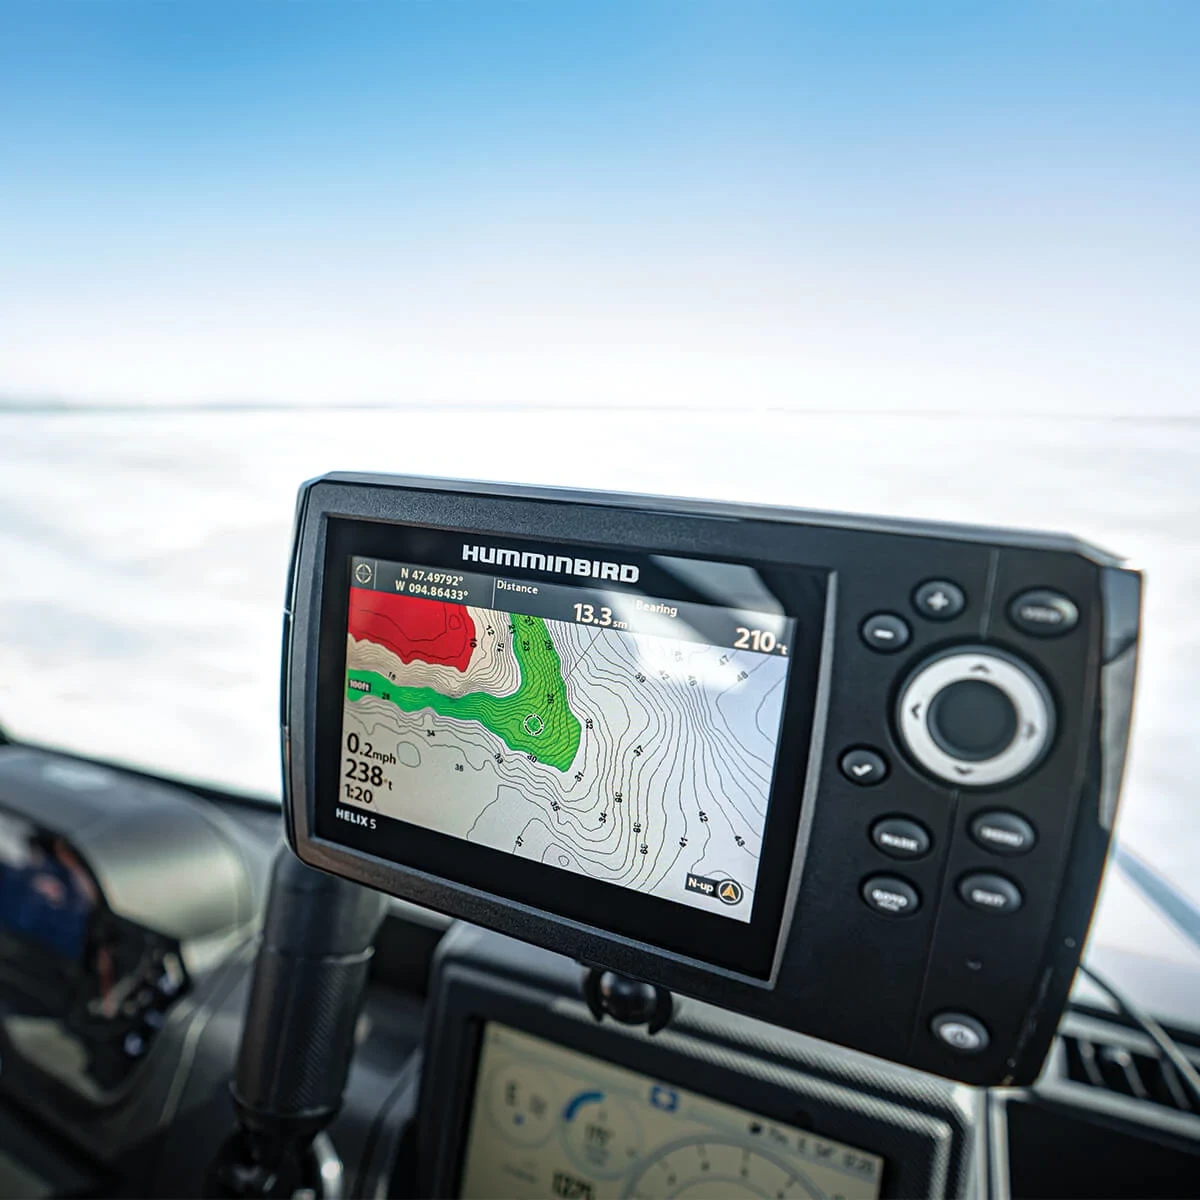 ICE HELIX 5 with a map on screen being used for navigation while mounted to the dash of an ATV